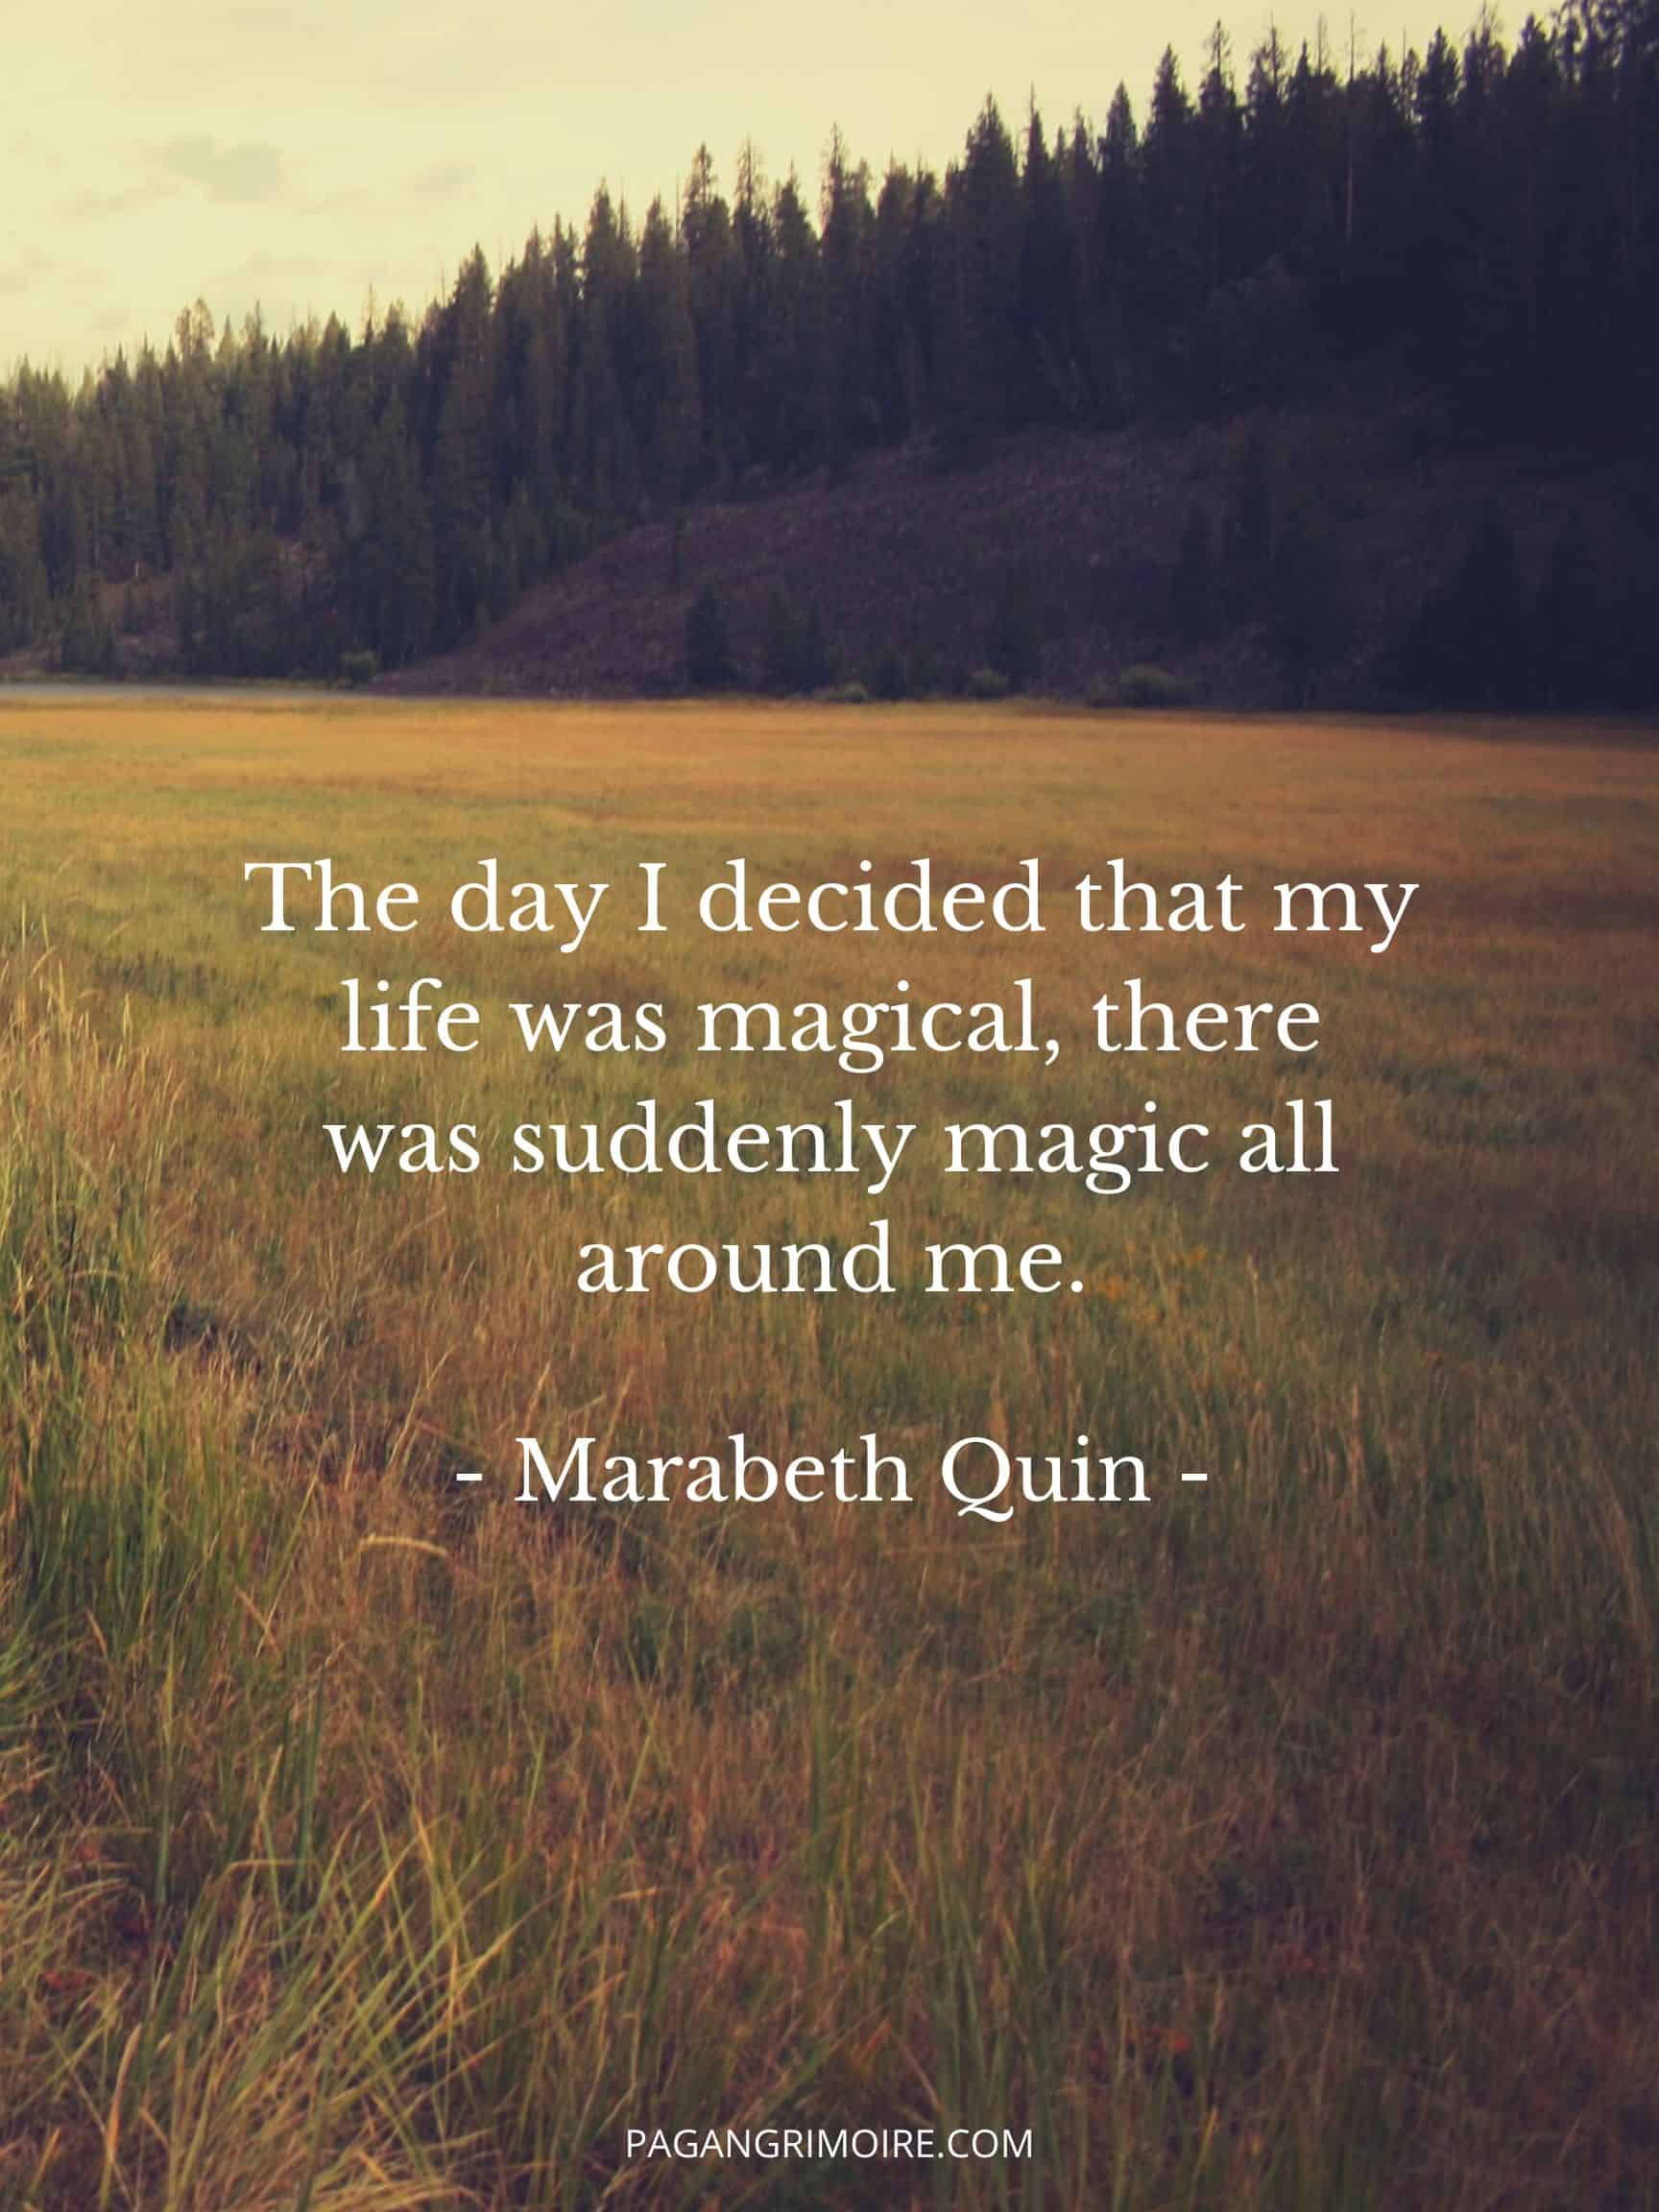 Witch Quotes - Day I Decided My Life Was Magical